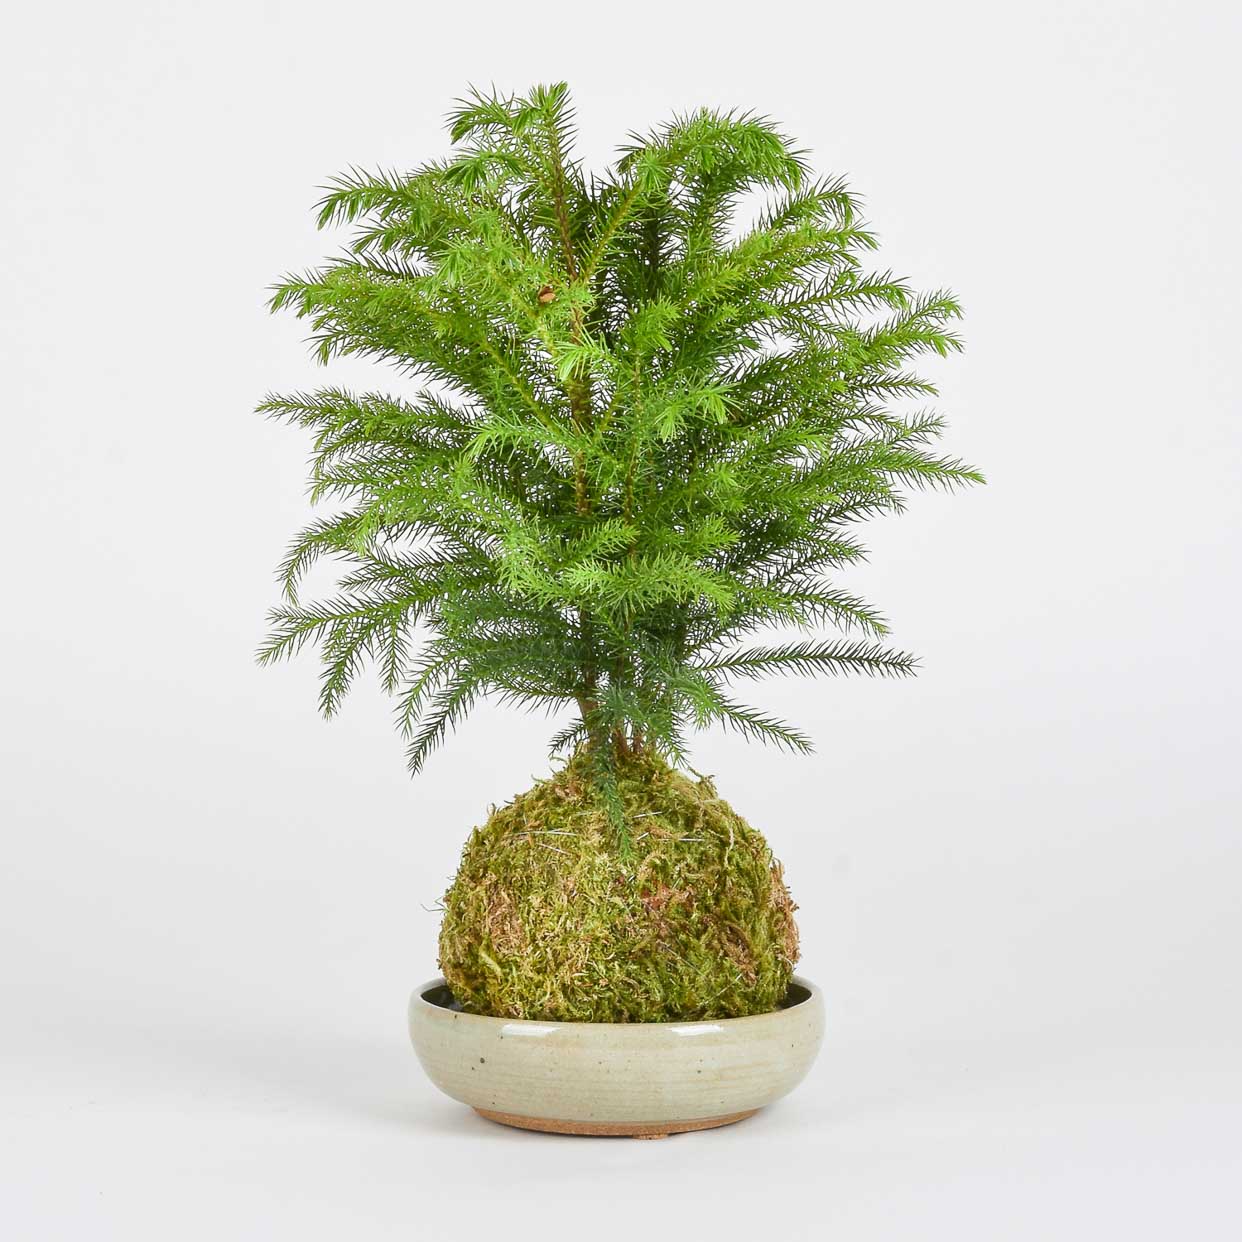 A Very Shippable Houseplant Holiday Gift Guide - Pistils Nursery